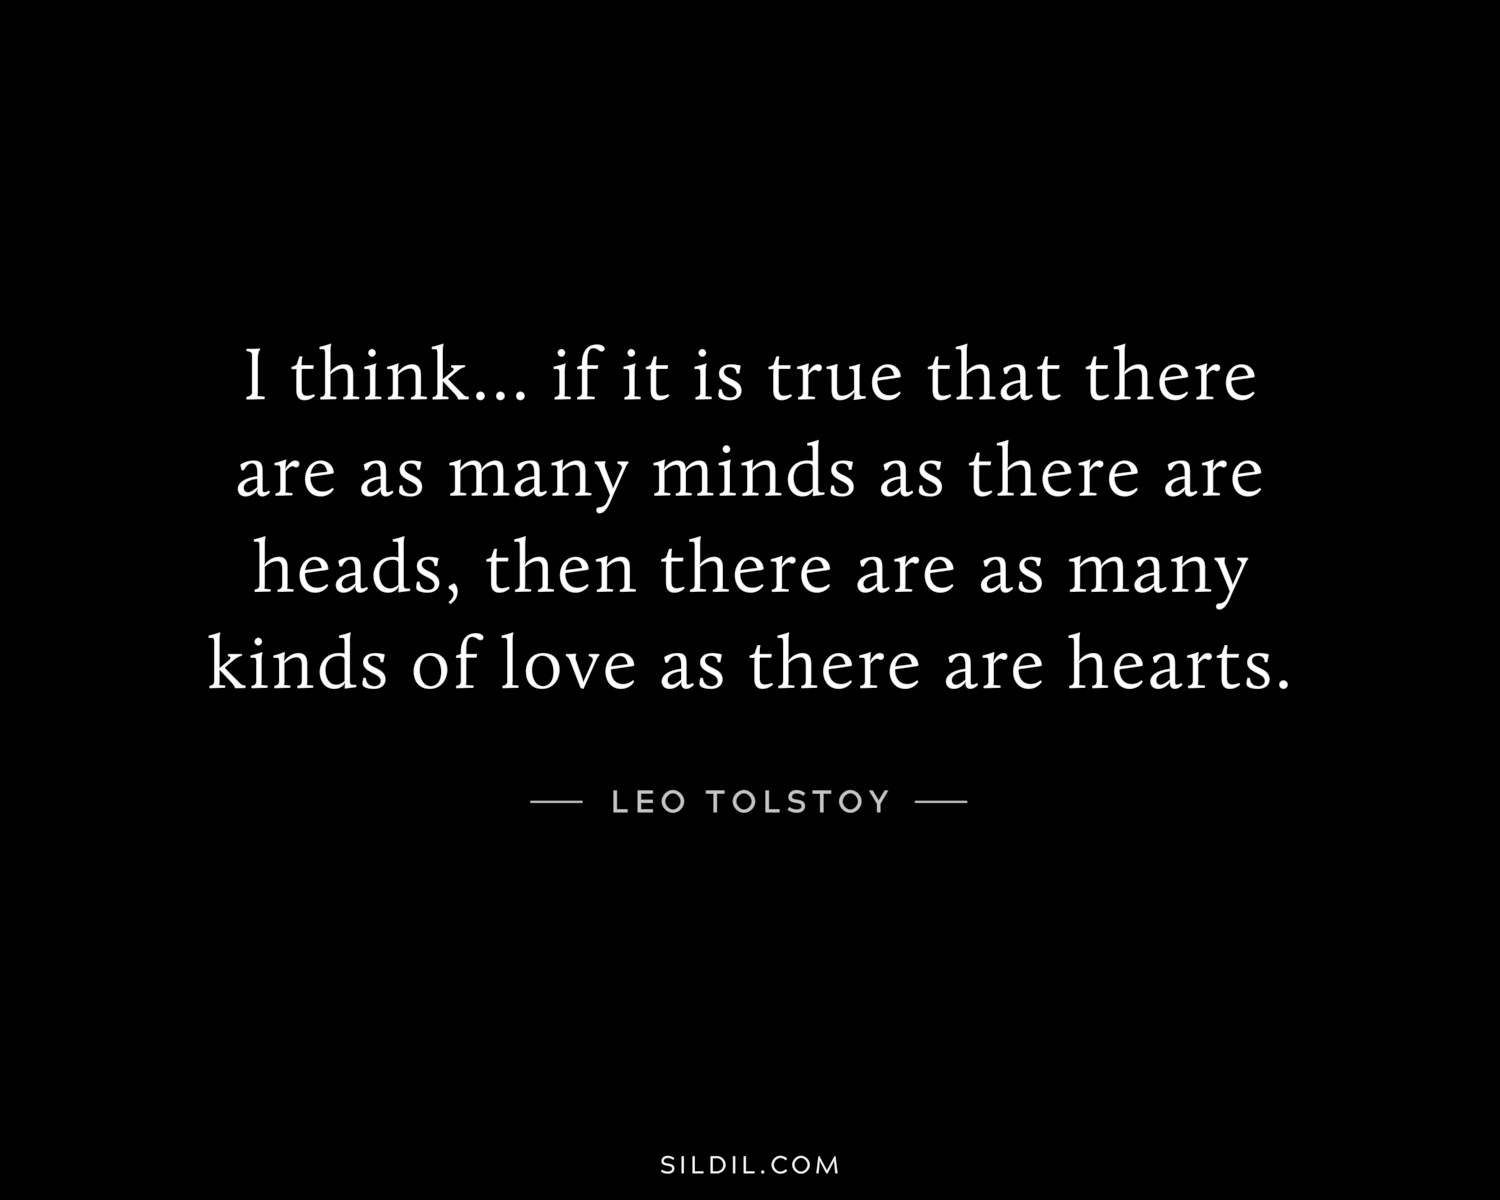 I think... if it is true that there are as many minds as there are heads, then there are as many kinds of love as there are hearts.